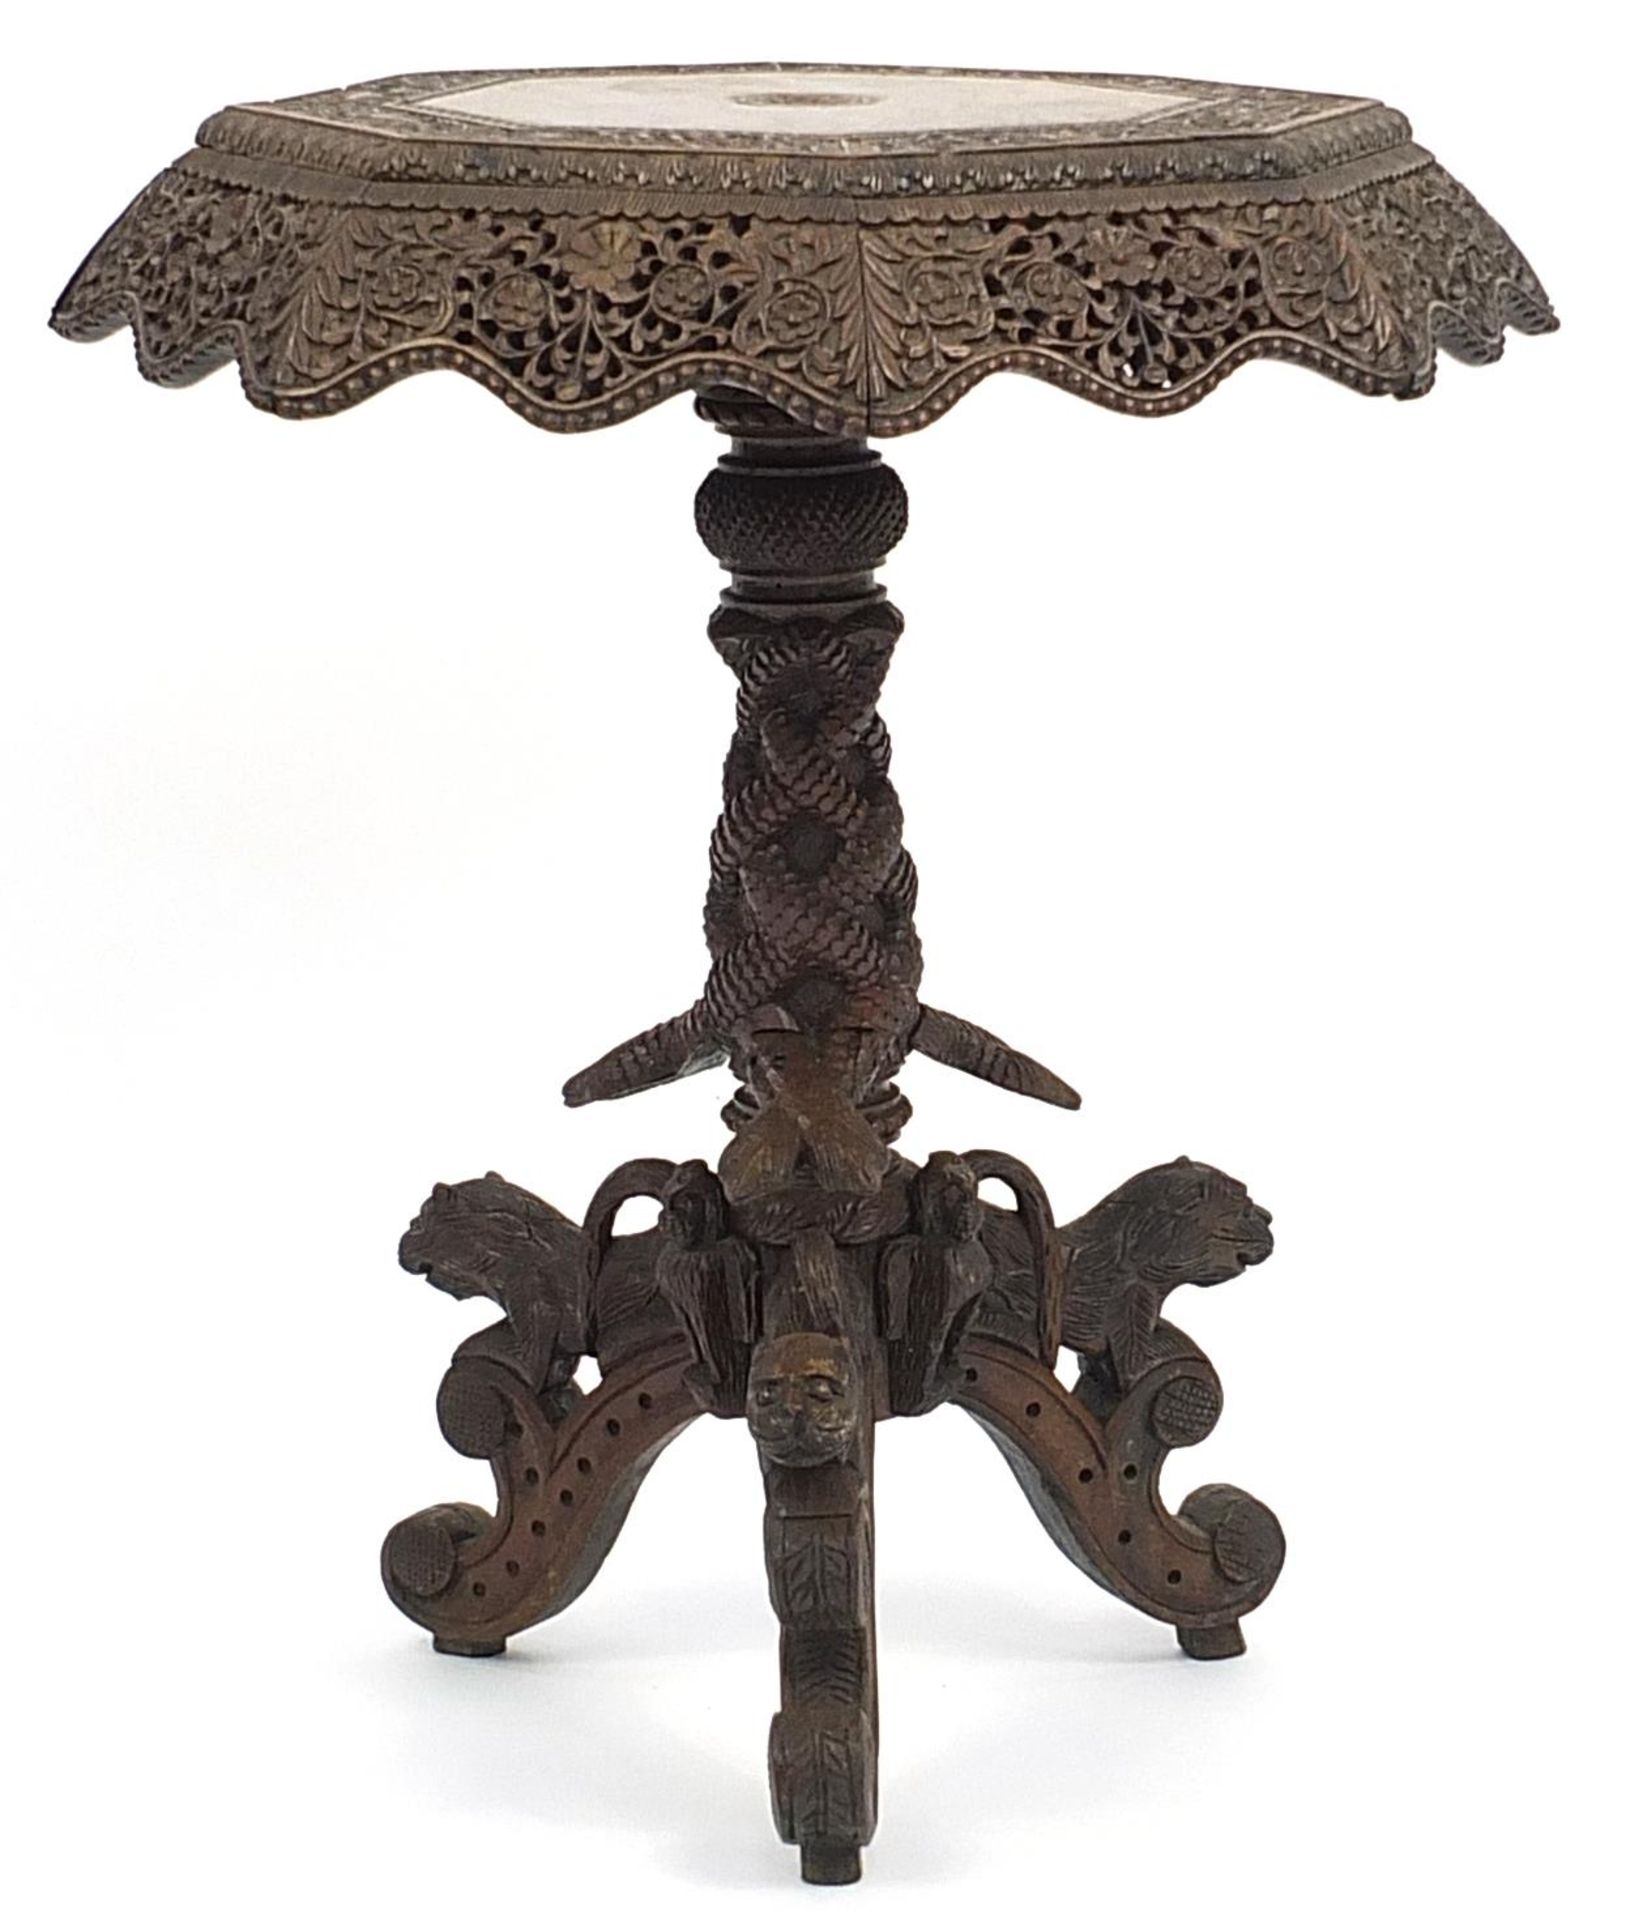 Burmese side table with octagonal top profusely carved with wild animals amongst flowers, with